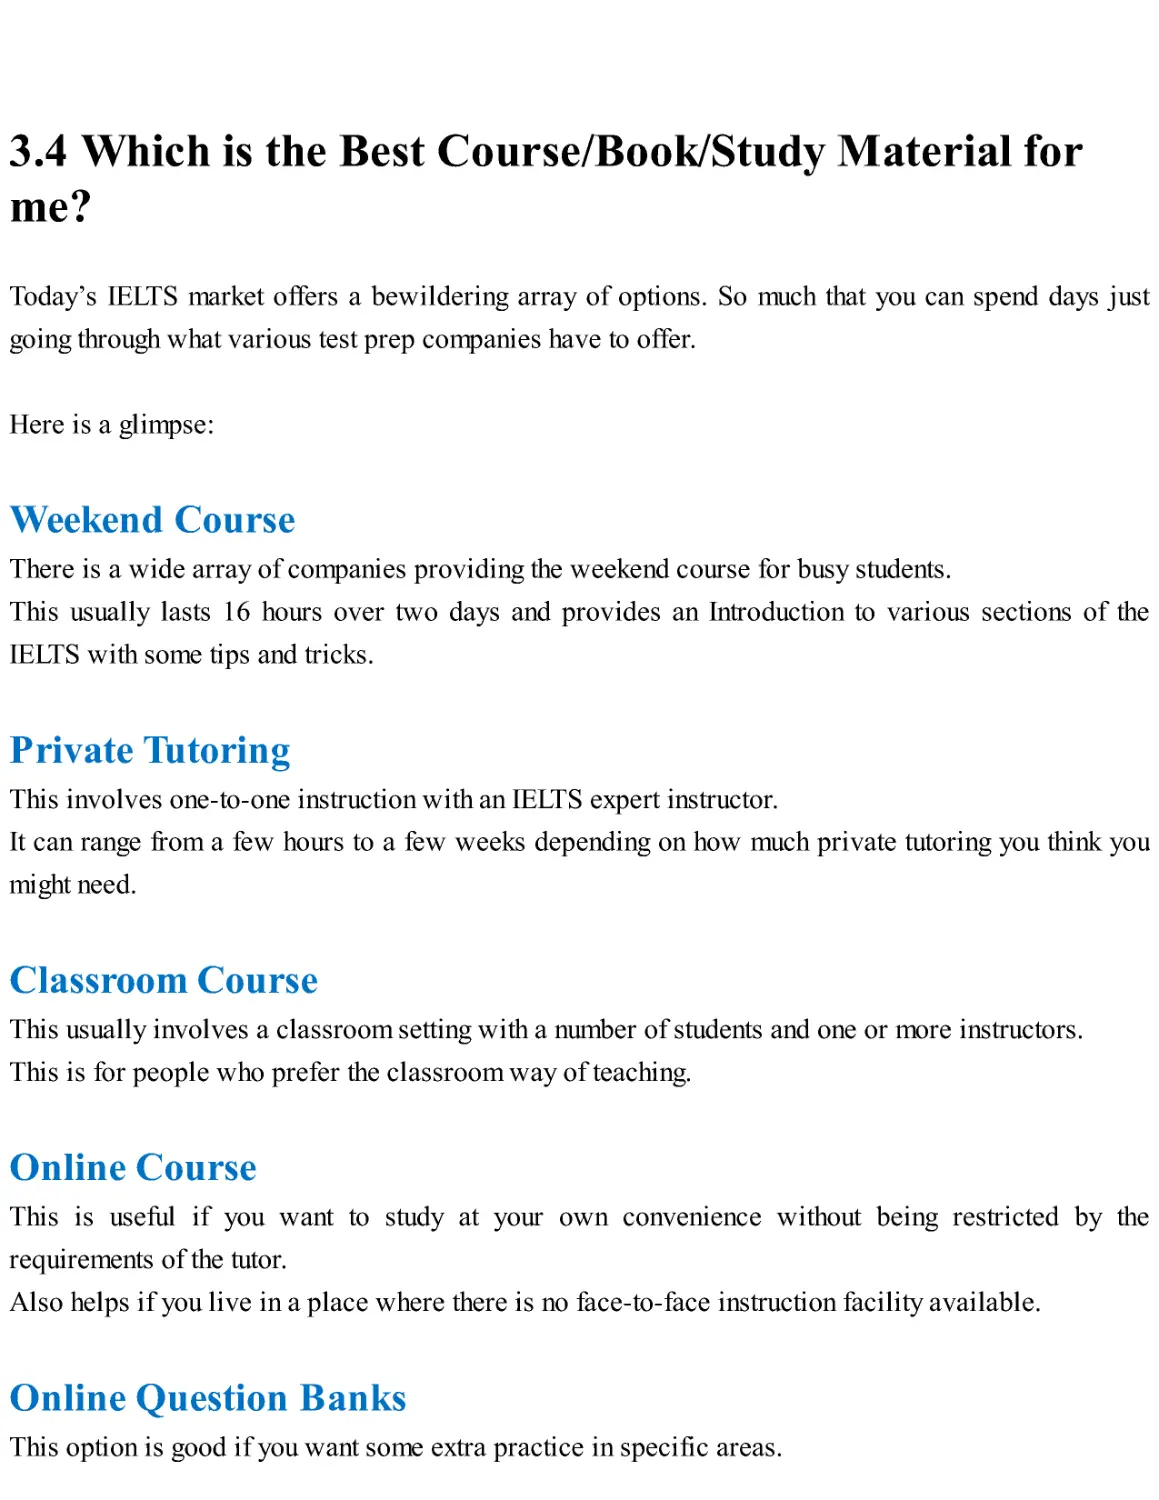 3.4 Which is the Best Course/Book/Study Material for me?
Private Tutoring
Classroom Course
Online Course
Online Question Banks